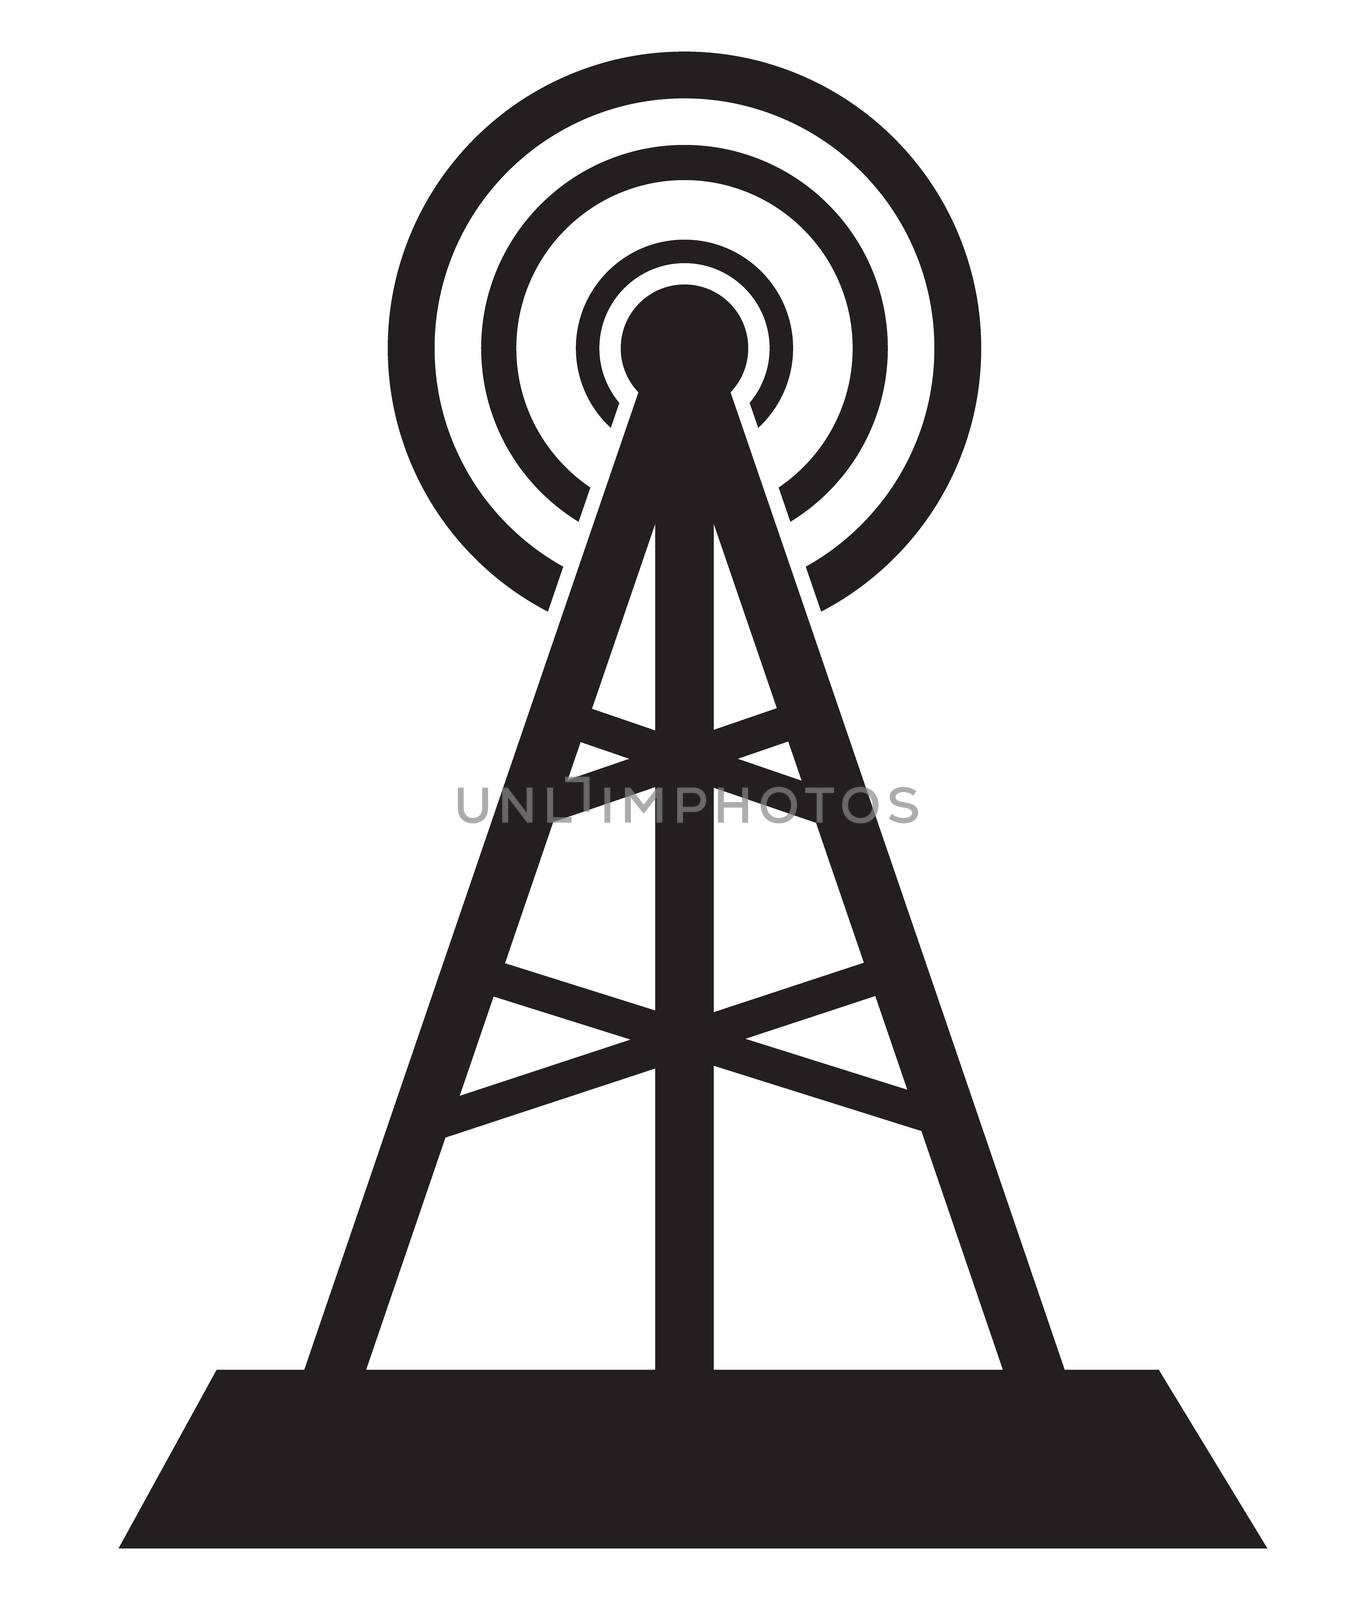 communication tower icon isolated in white background. communication tower sign.